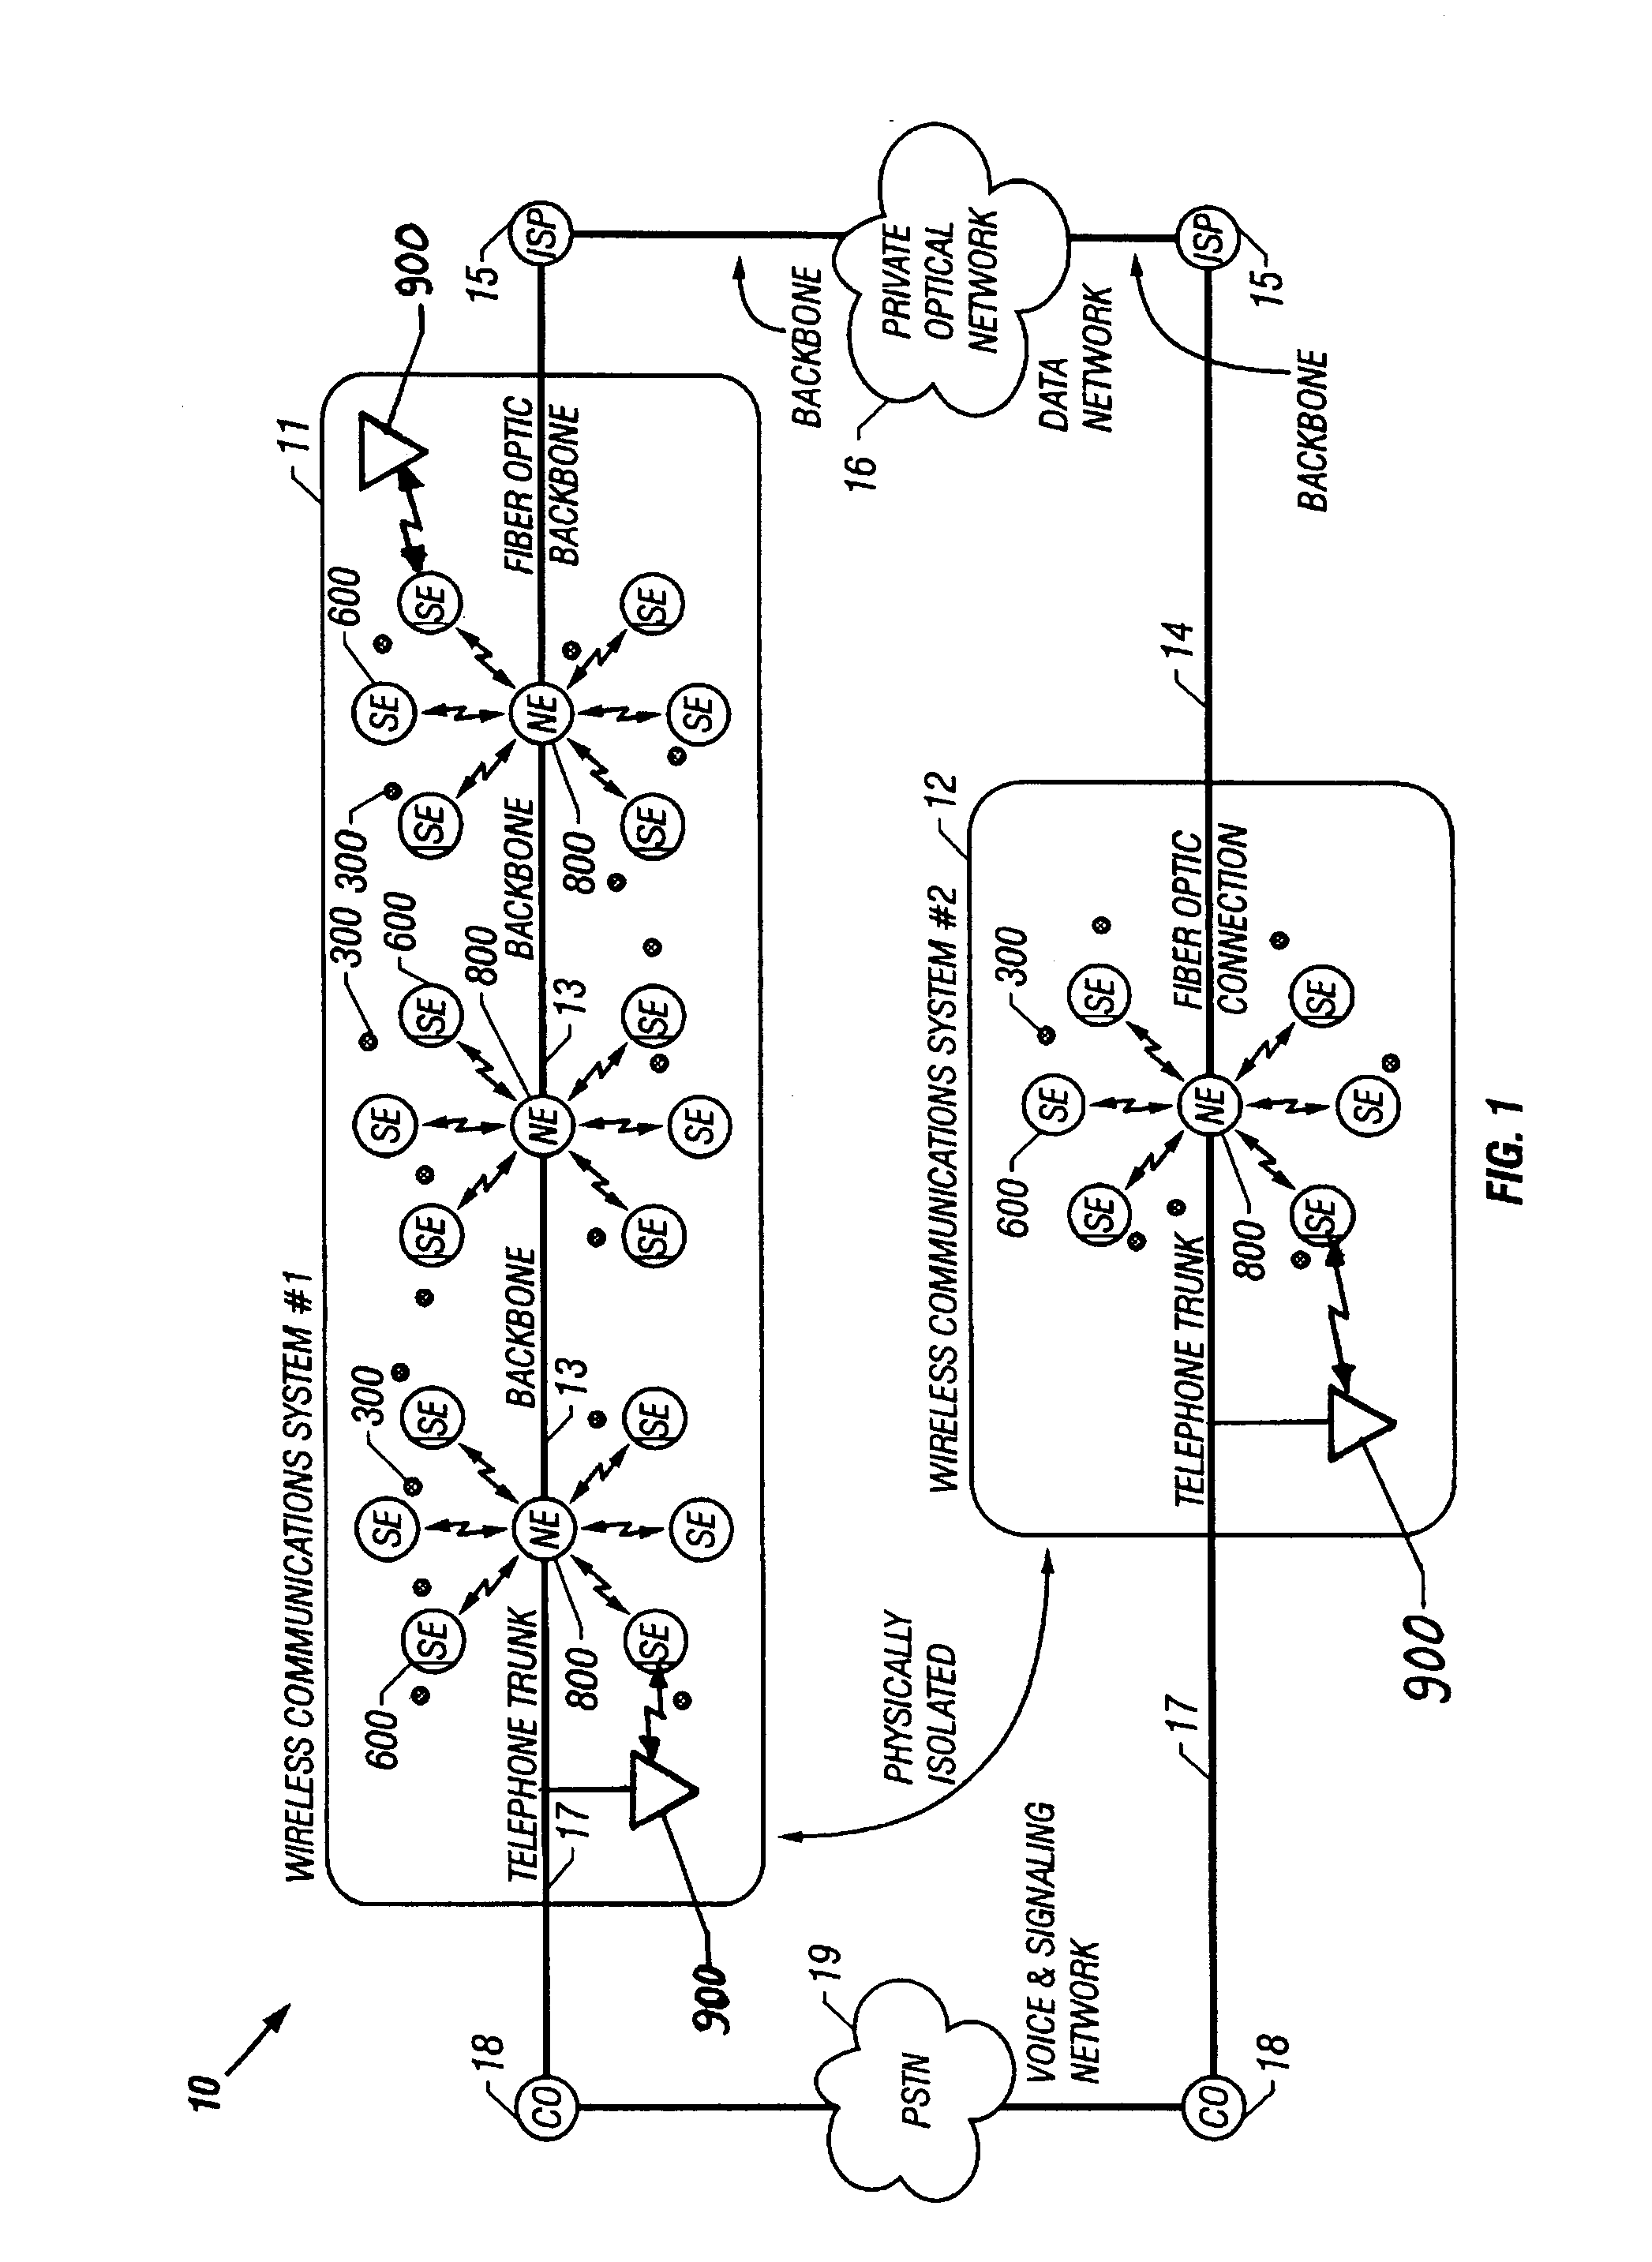 Wireless communication device with multiple external communication links